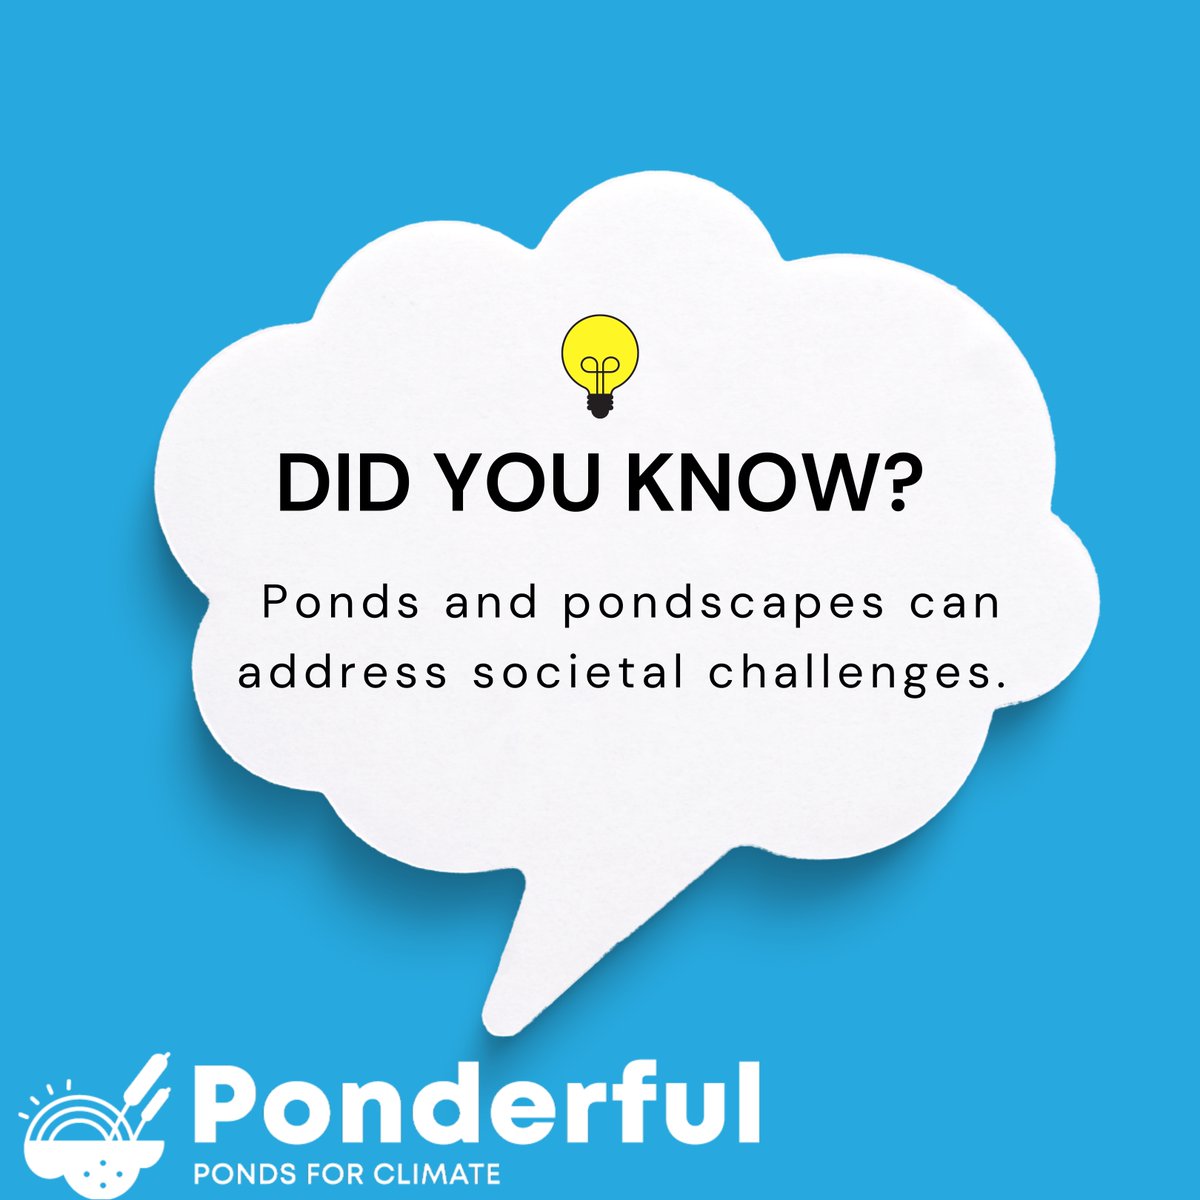 From providing learning and inspiration to regulating water quality and protecting against hazards, like fires and floods, ponds can address many of the biggest challenges we face. Learn how the #PONDERFUL demo-sites address societal challenges: ponderful.eu/demo-sites/